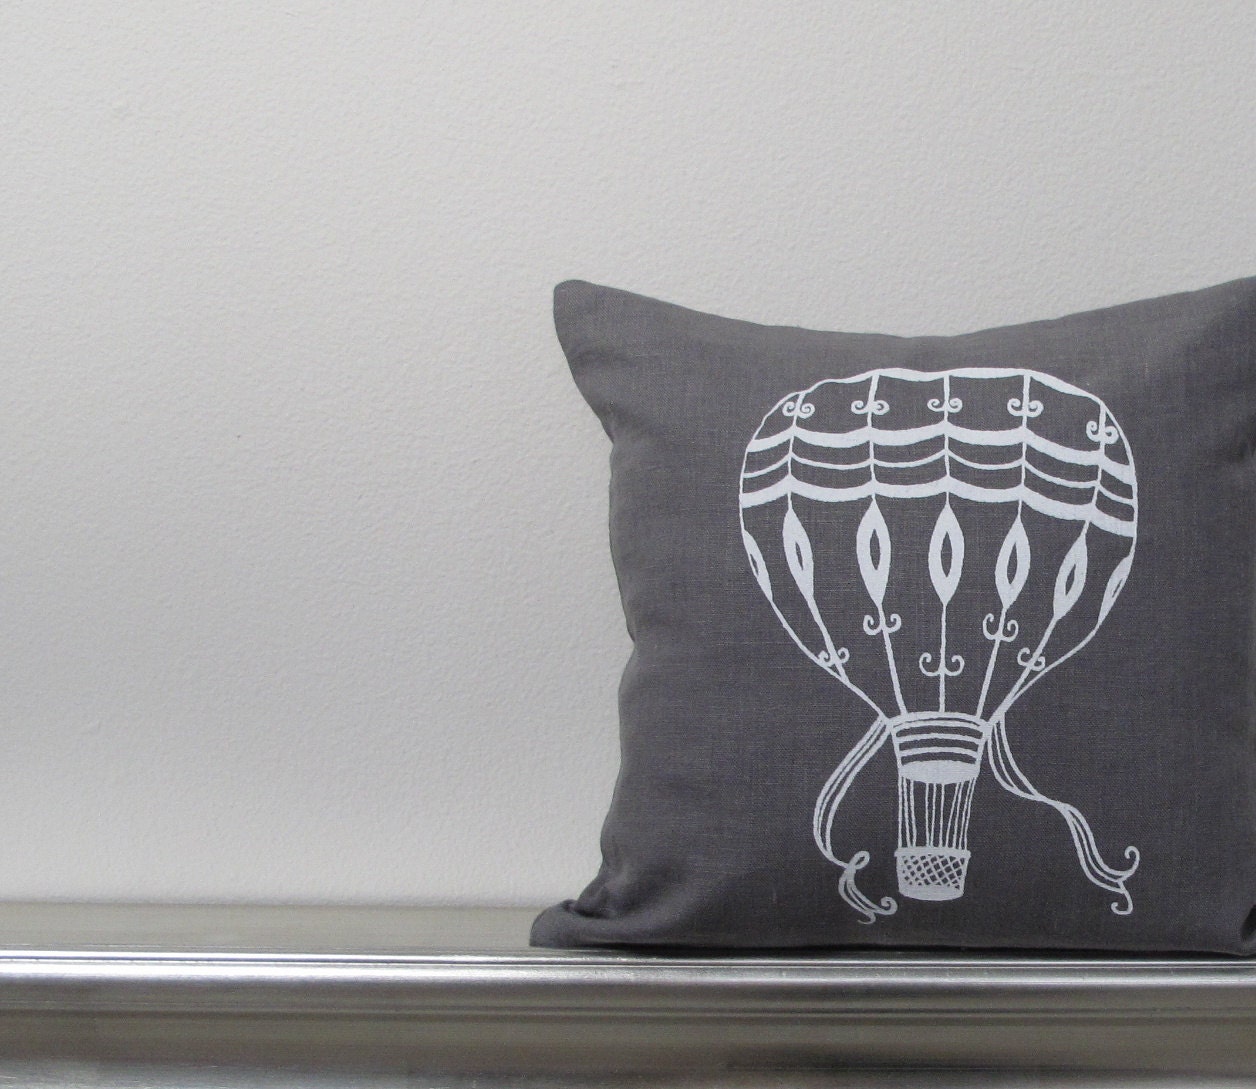 Pillow Cover - Vintage Hot Air Balloon in White on Gray Linen- 12 x 12 inches by Sweetnature Designs - SweetnatureDesigns